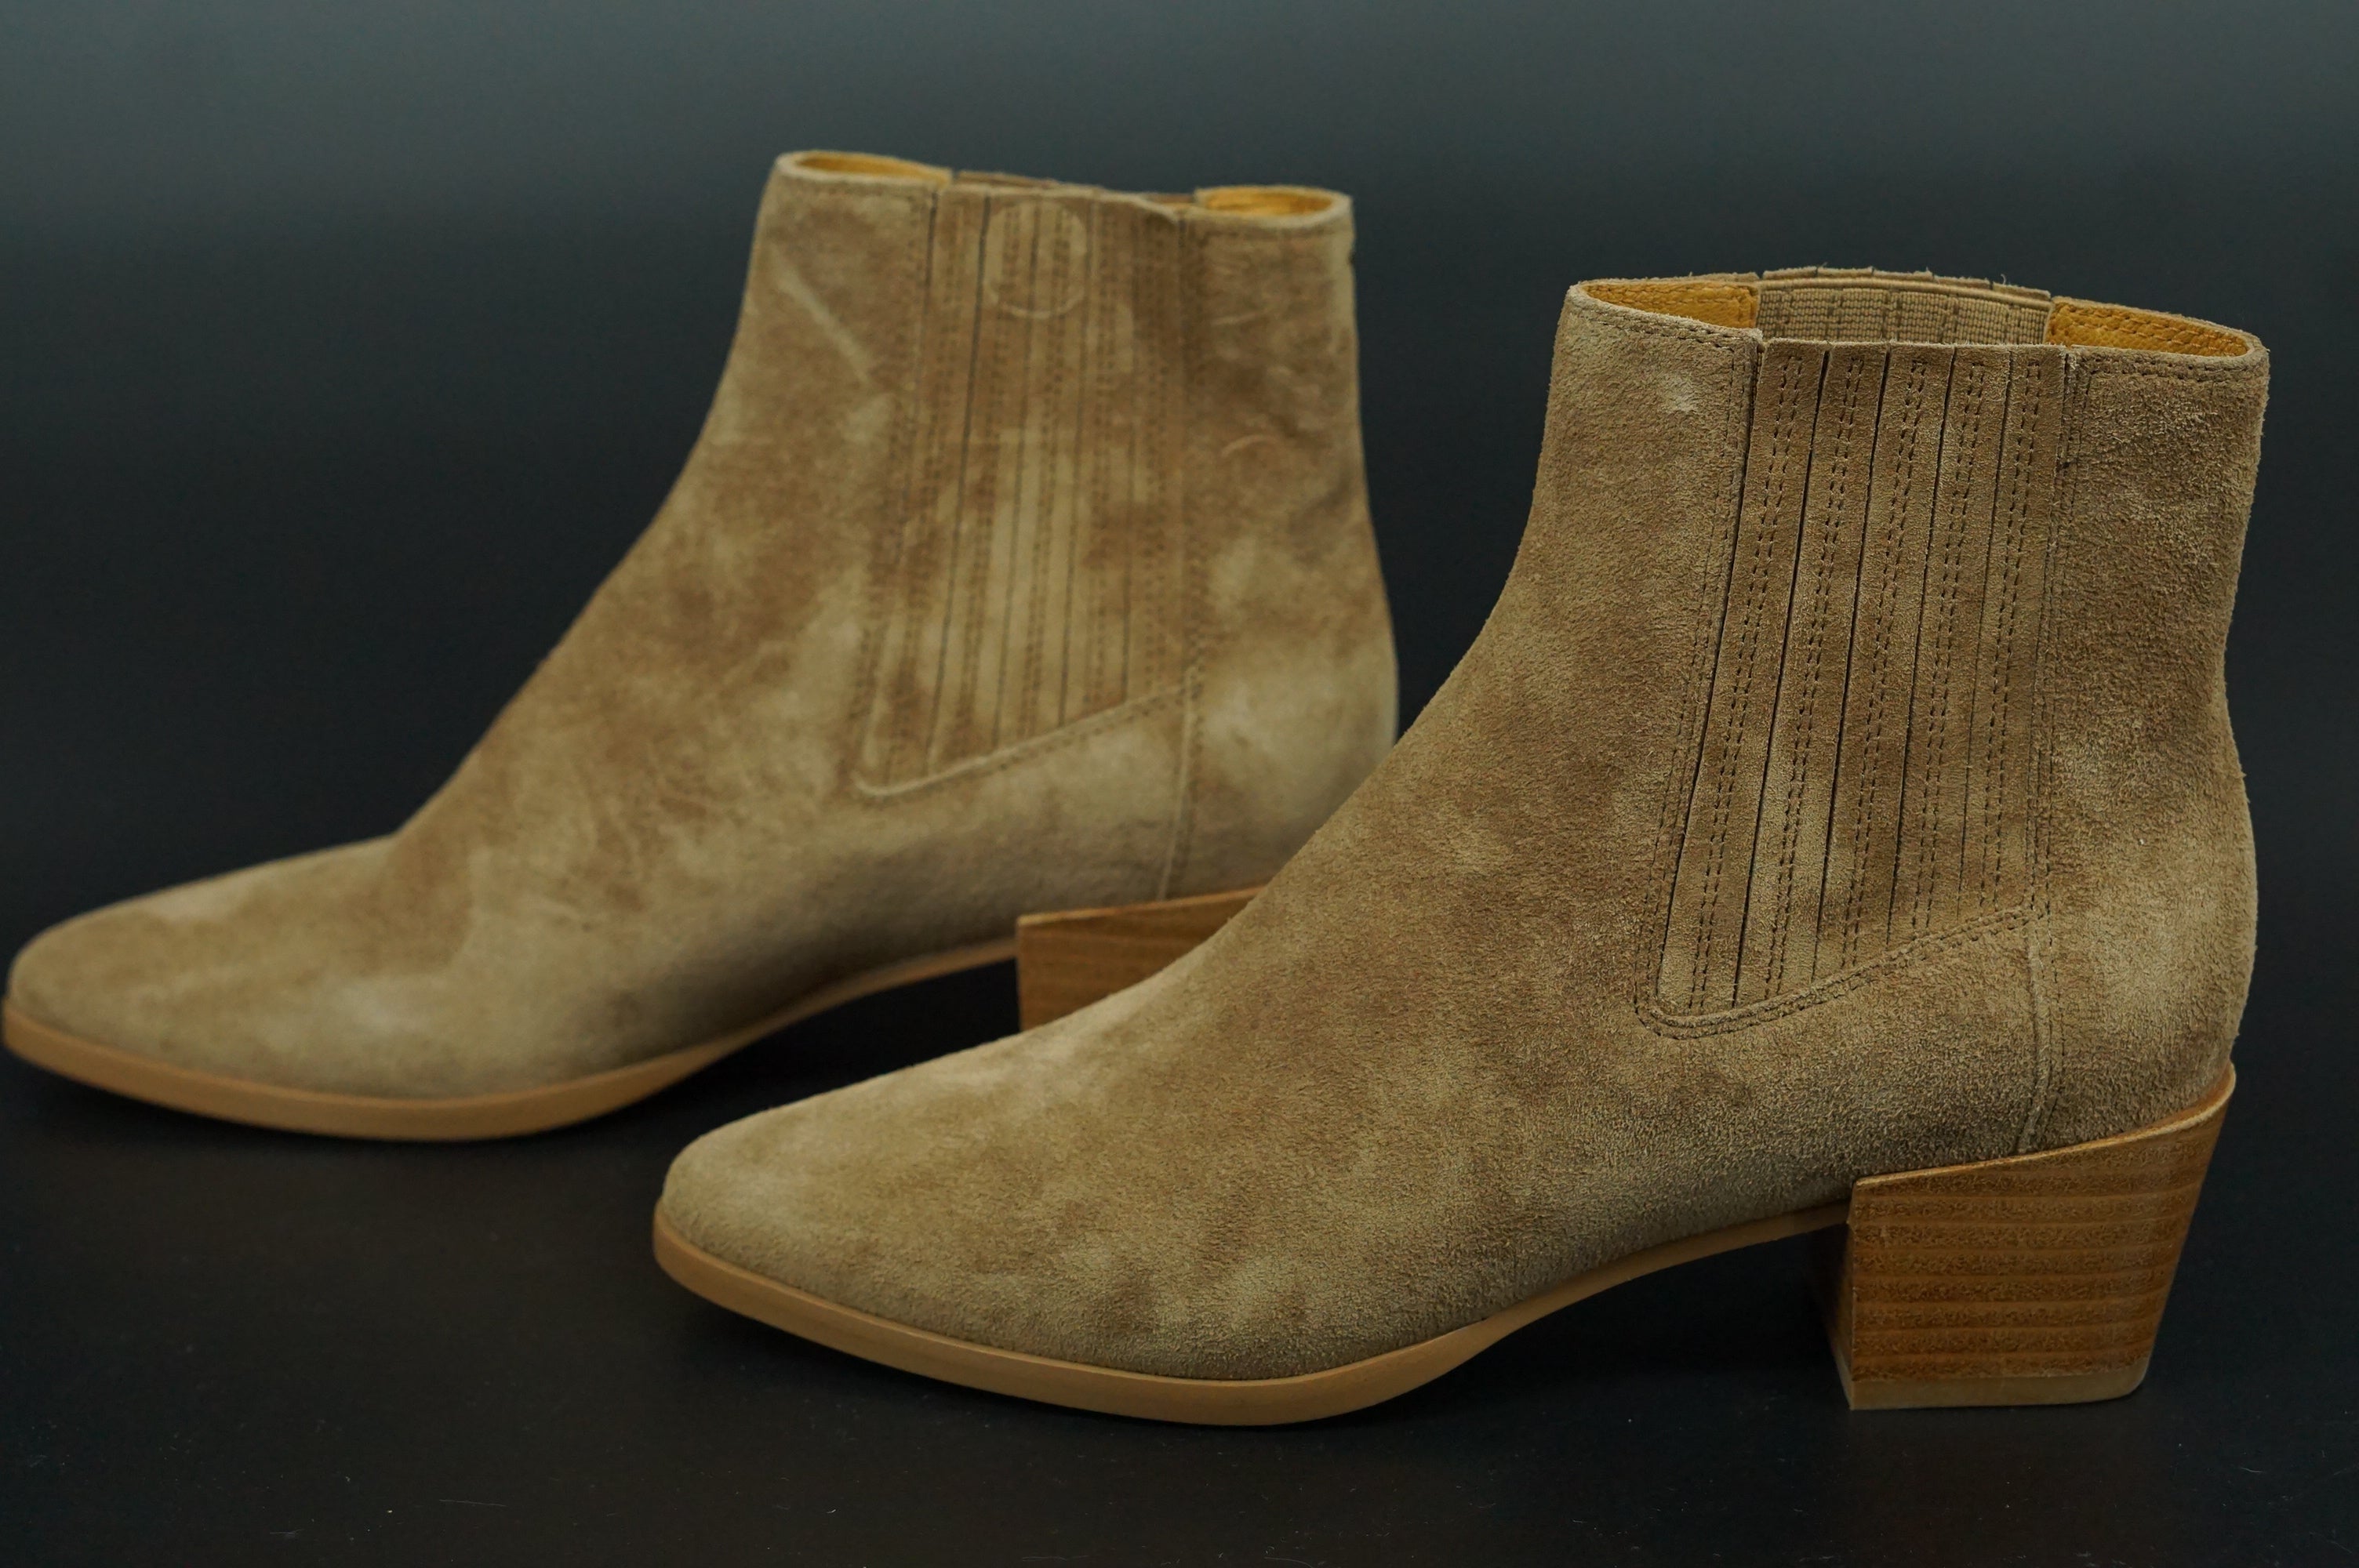 Rag & Bone ICONS Rover Chelsea Boot Sz 38 Stretch $395 Camel Suede Ankle